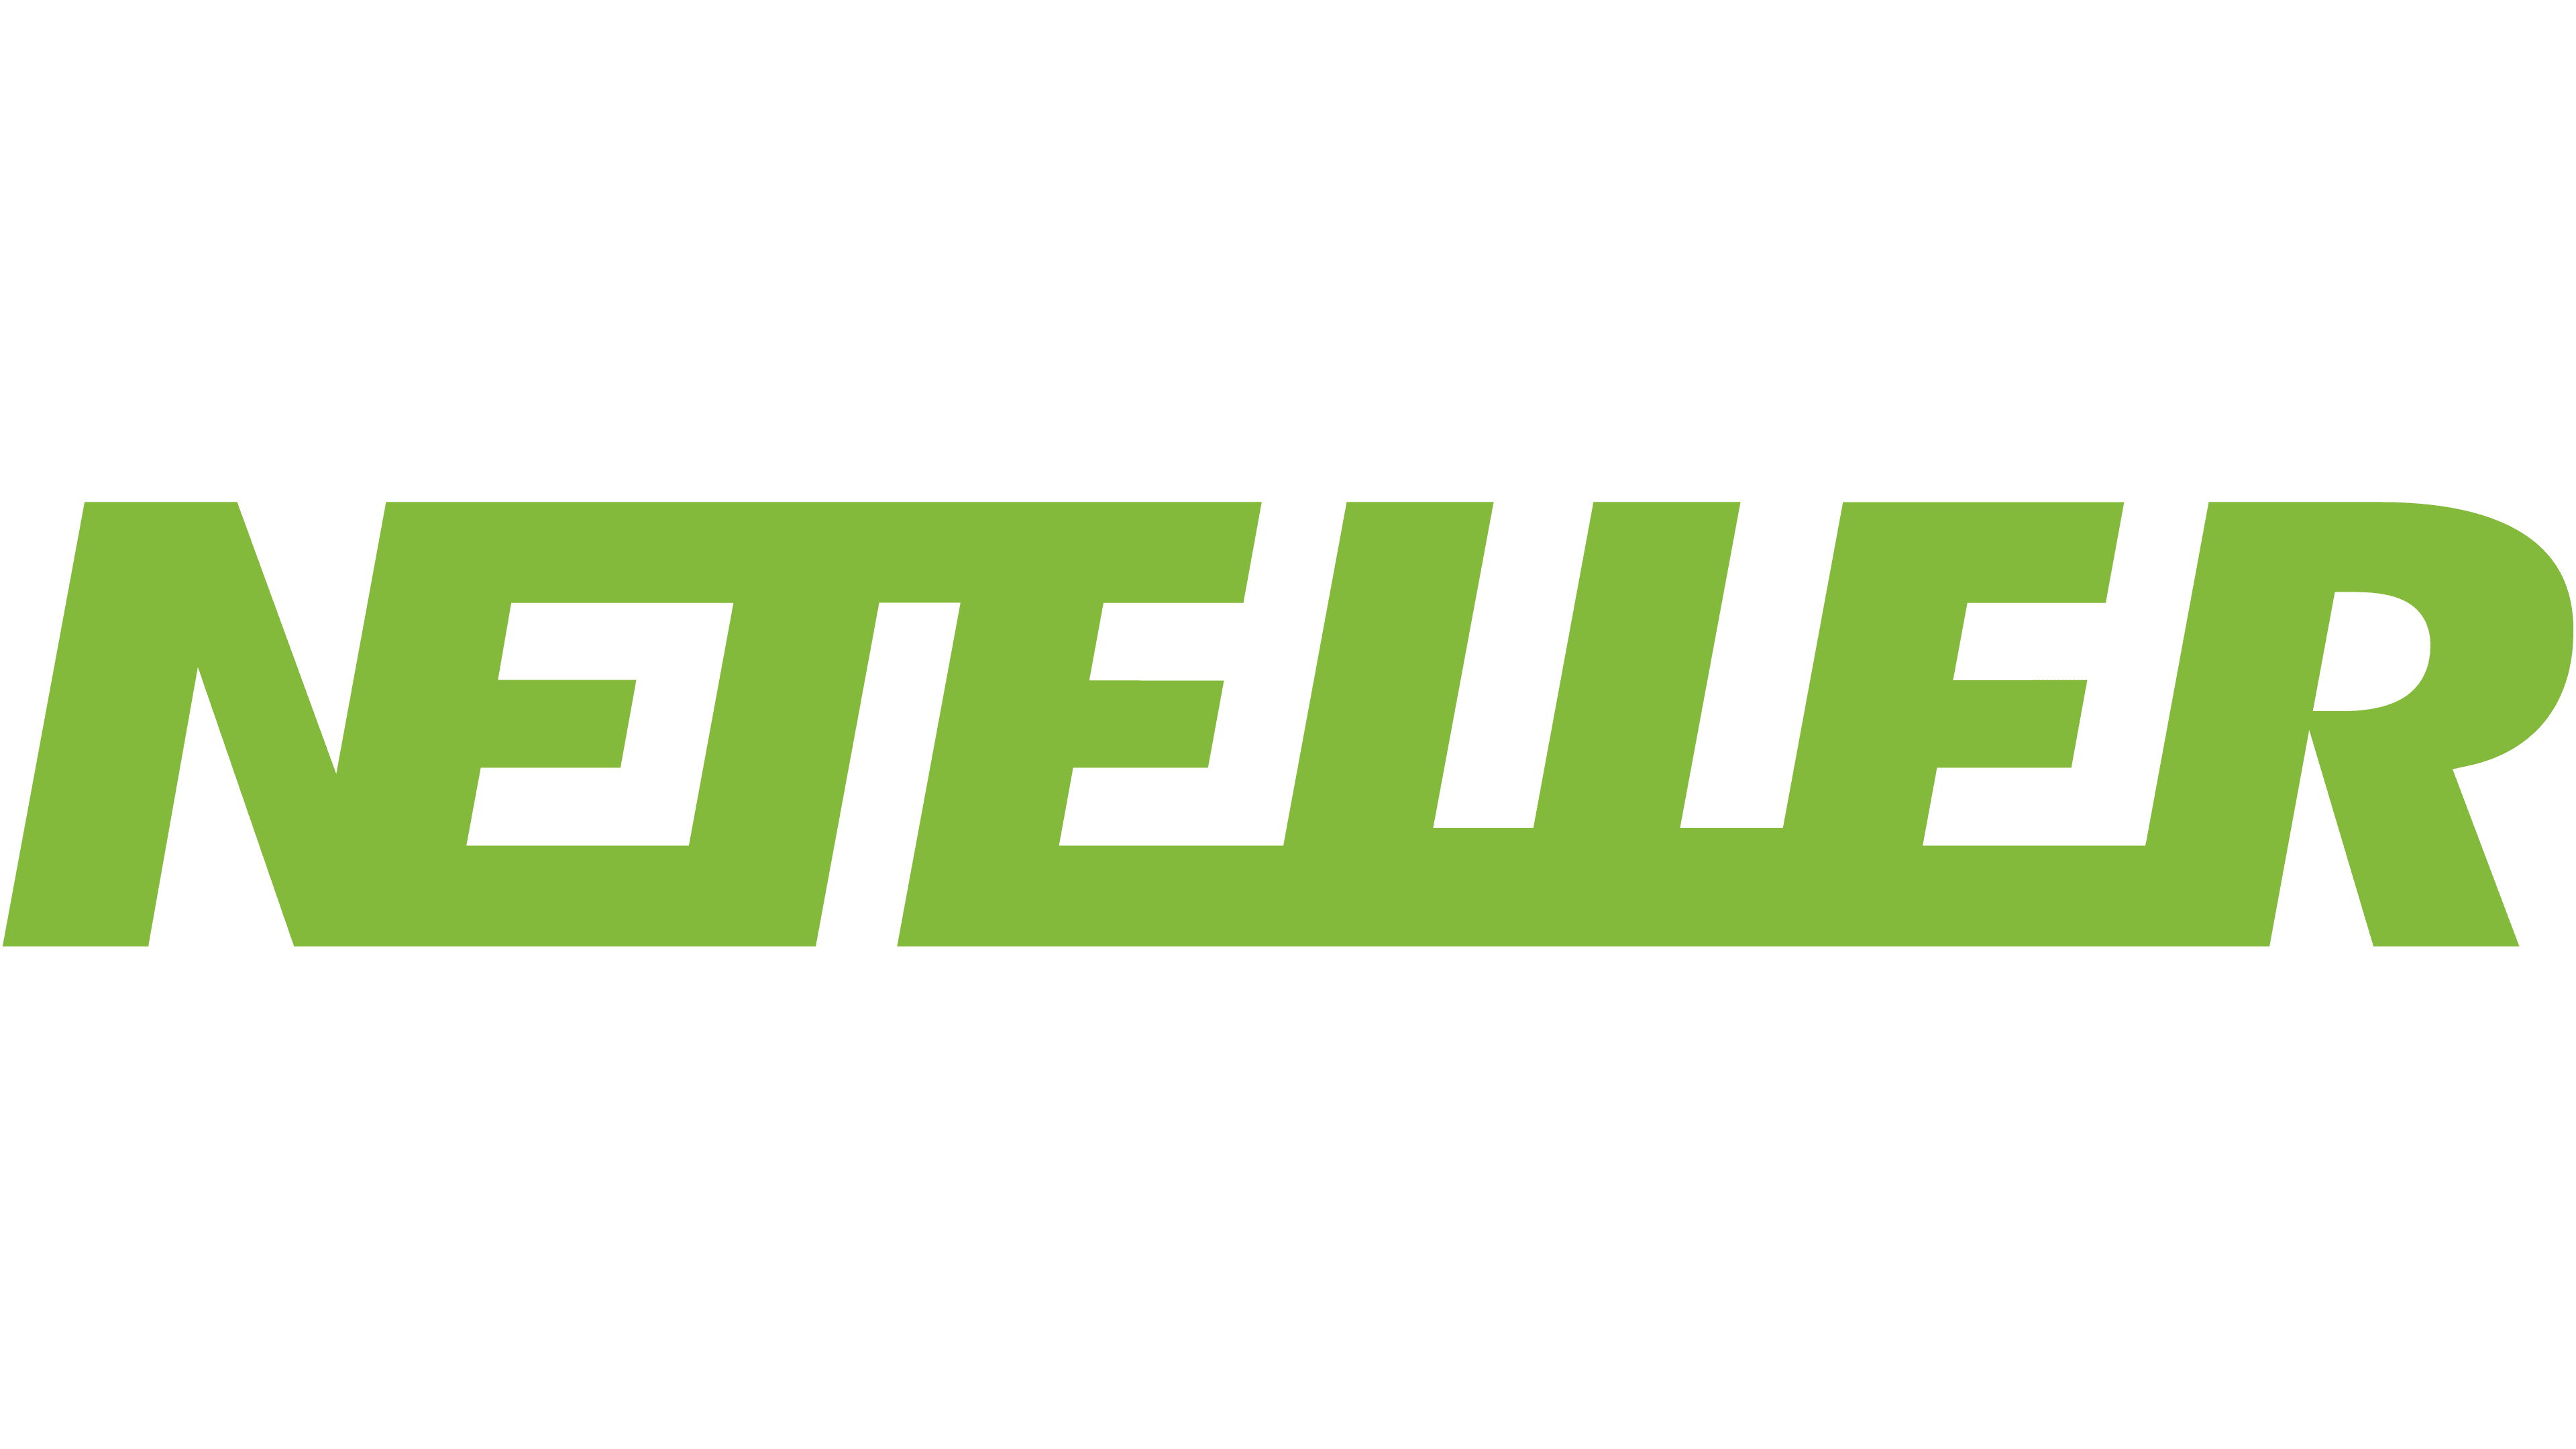 Trusted Neteller Casinos in Luxembourg